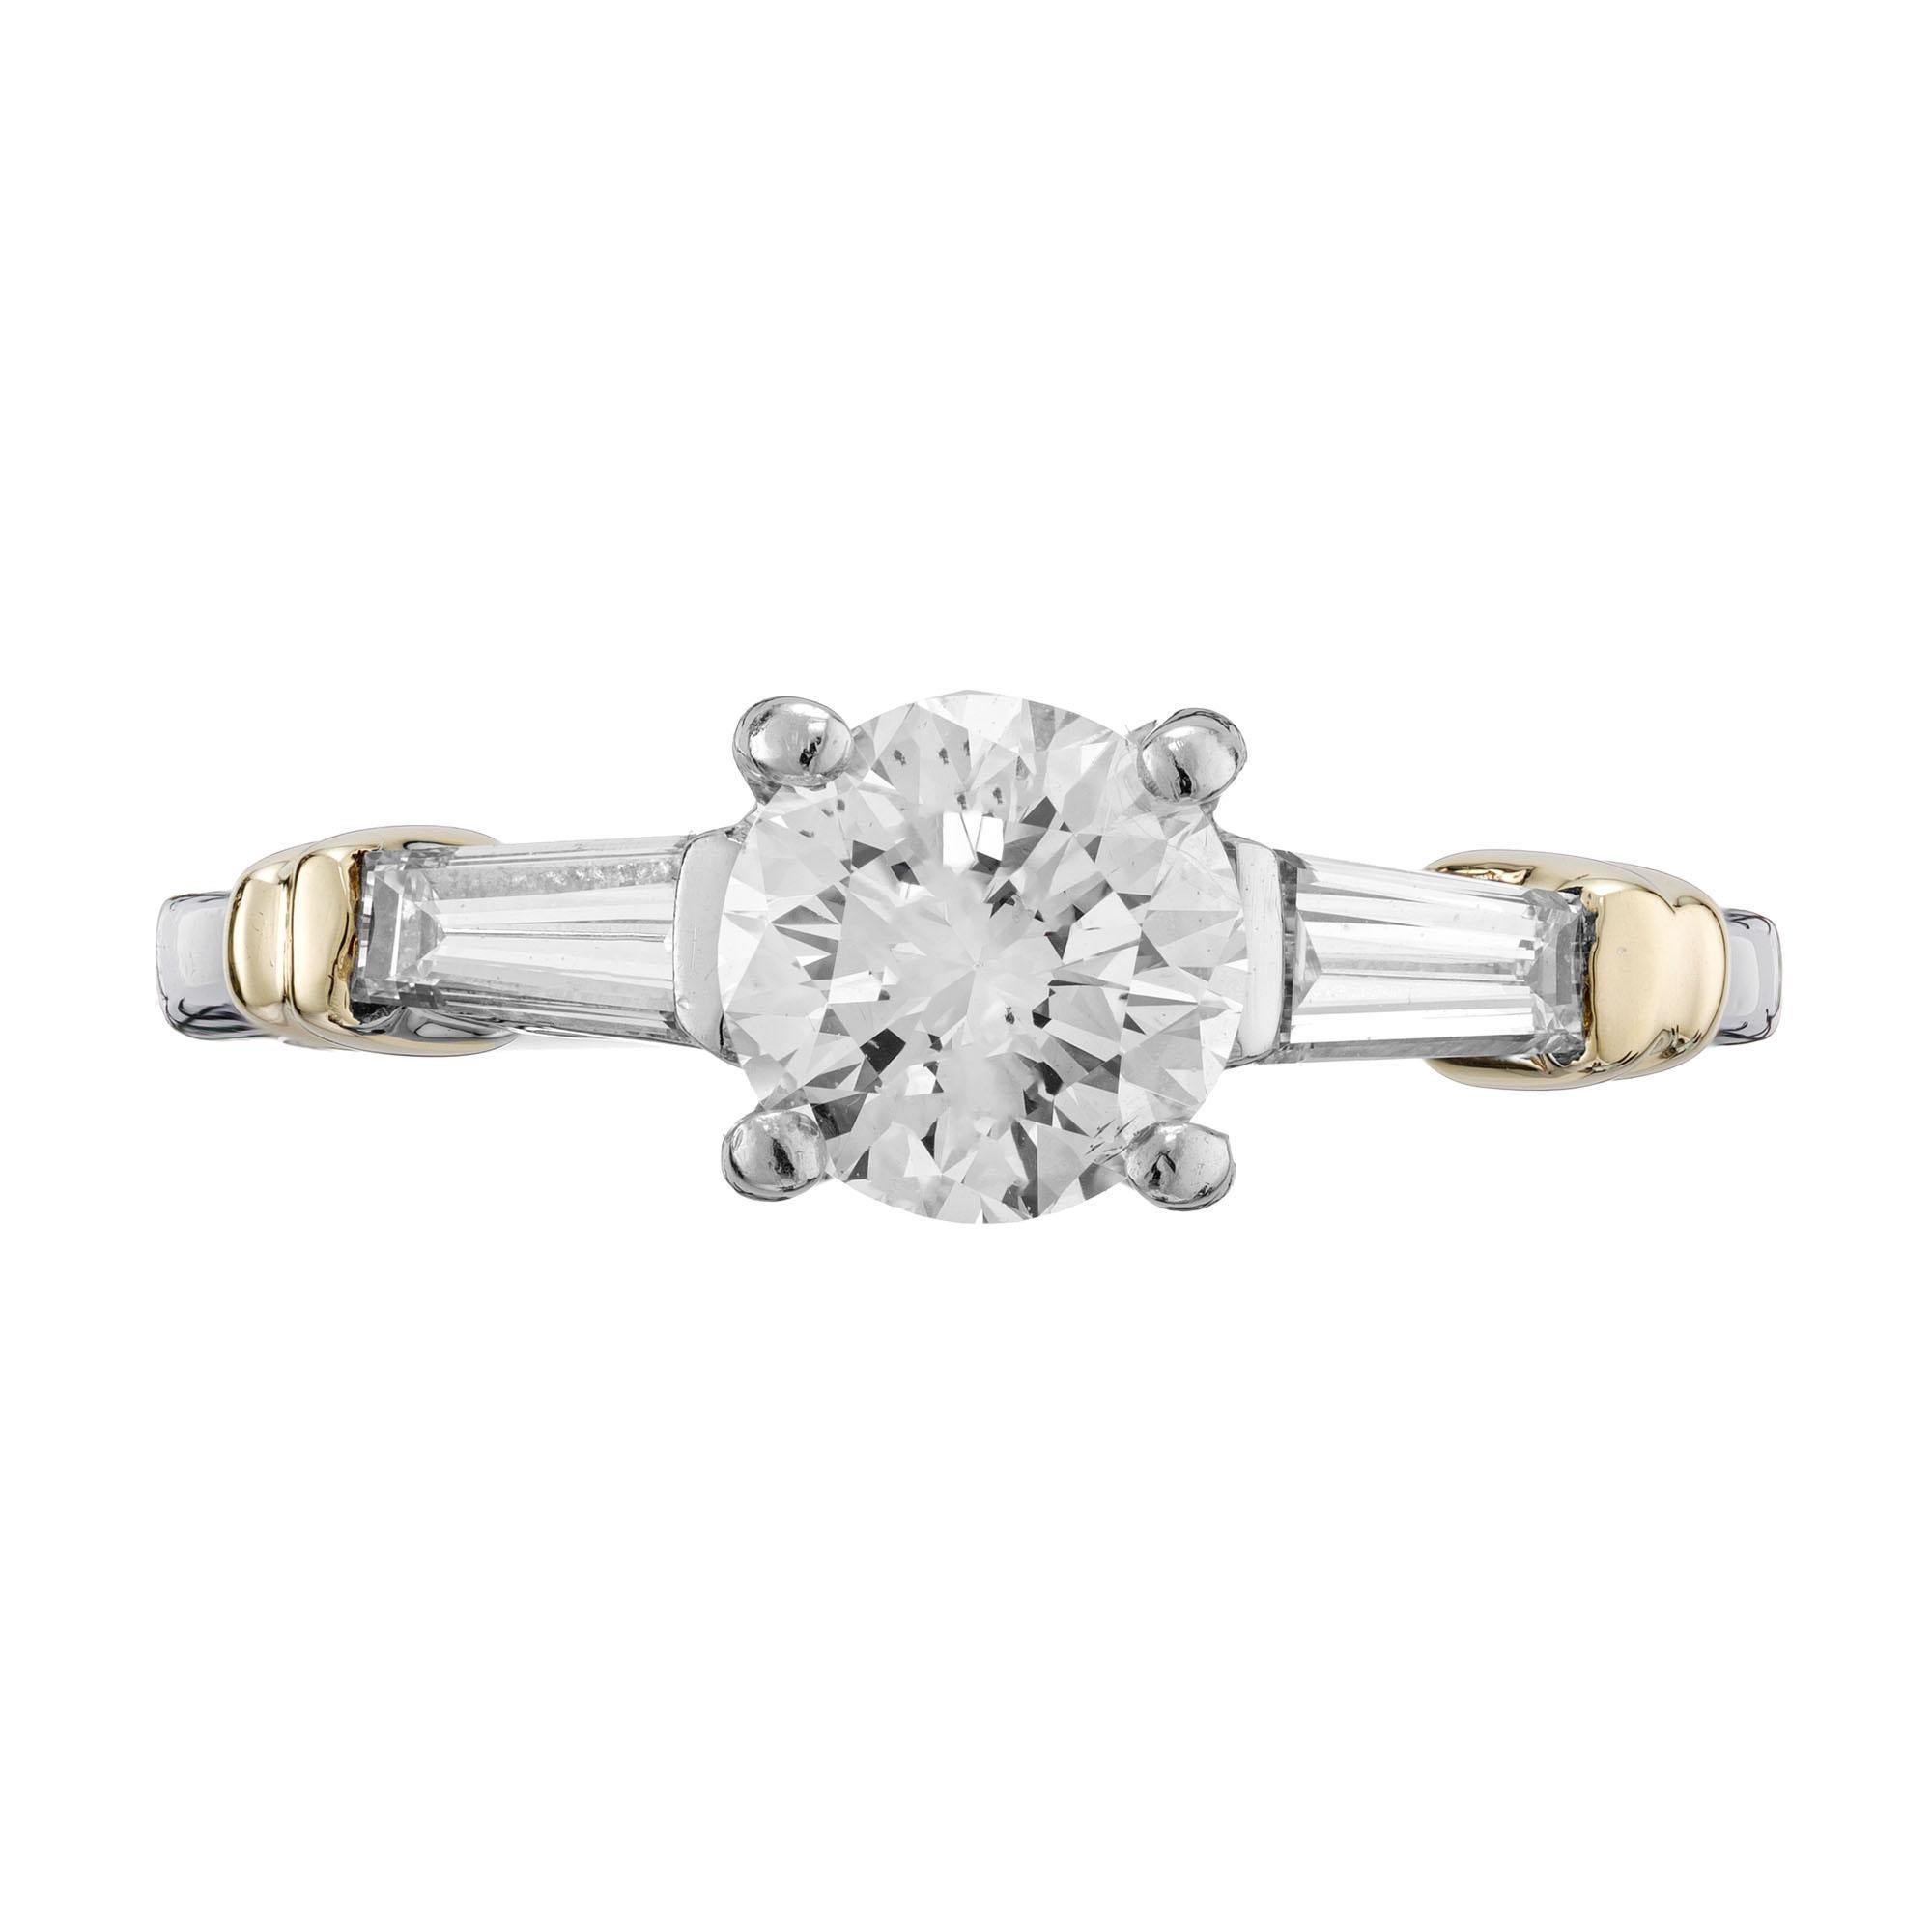 Diamond three-stone engagement ring. EGL certified .97ct round brilliant cut diamond center stone with 2 tapered baguette side diamonds, set in platinum and 18k yellow gold.  

1 round diamond approx. total weight .97cts, I-J, SI1, 6.29 c 6.28 x